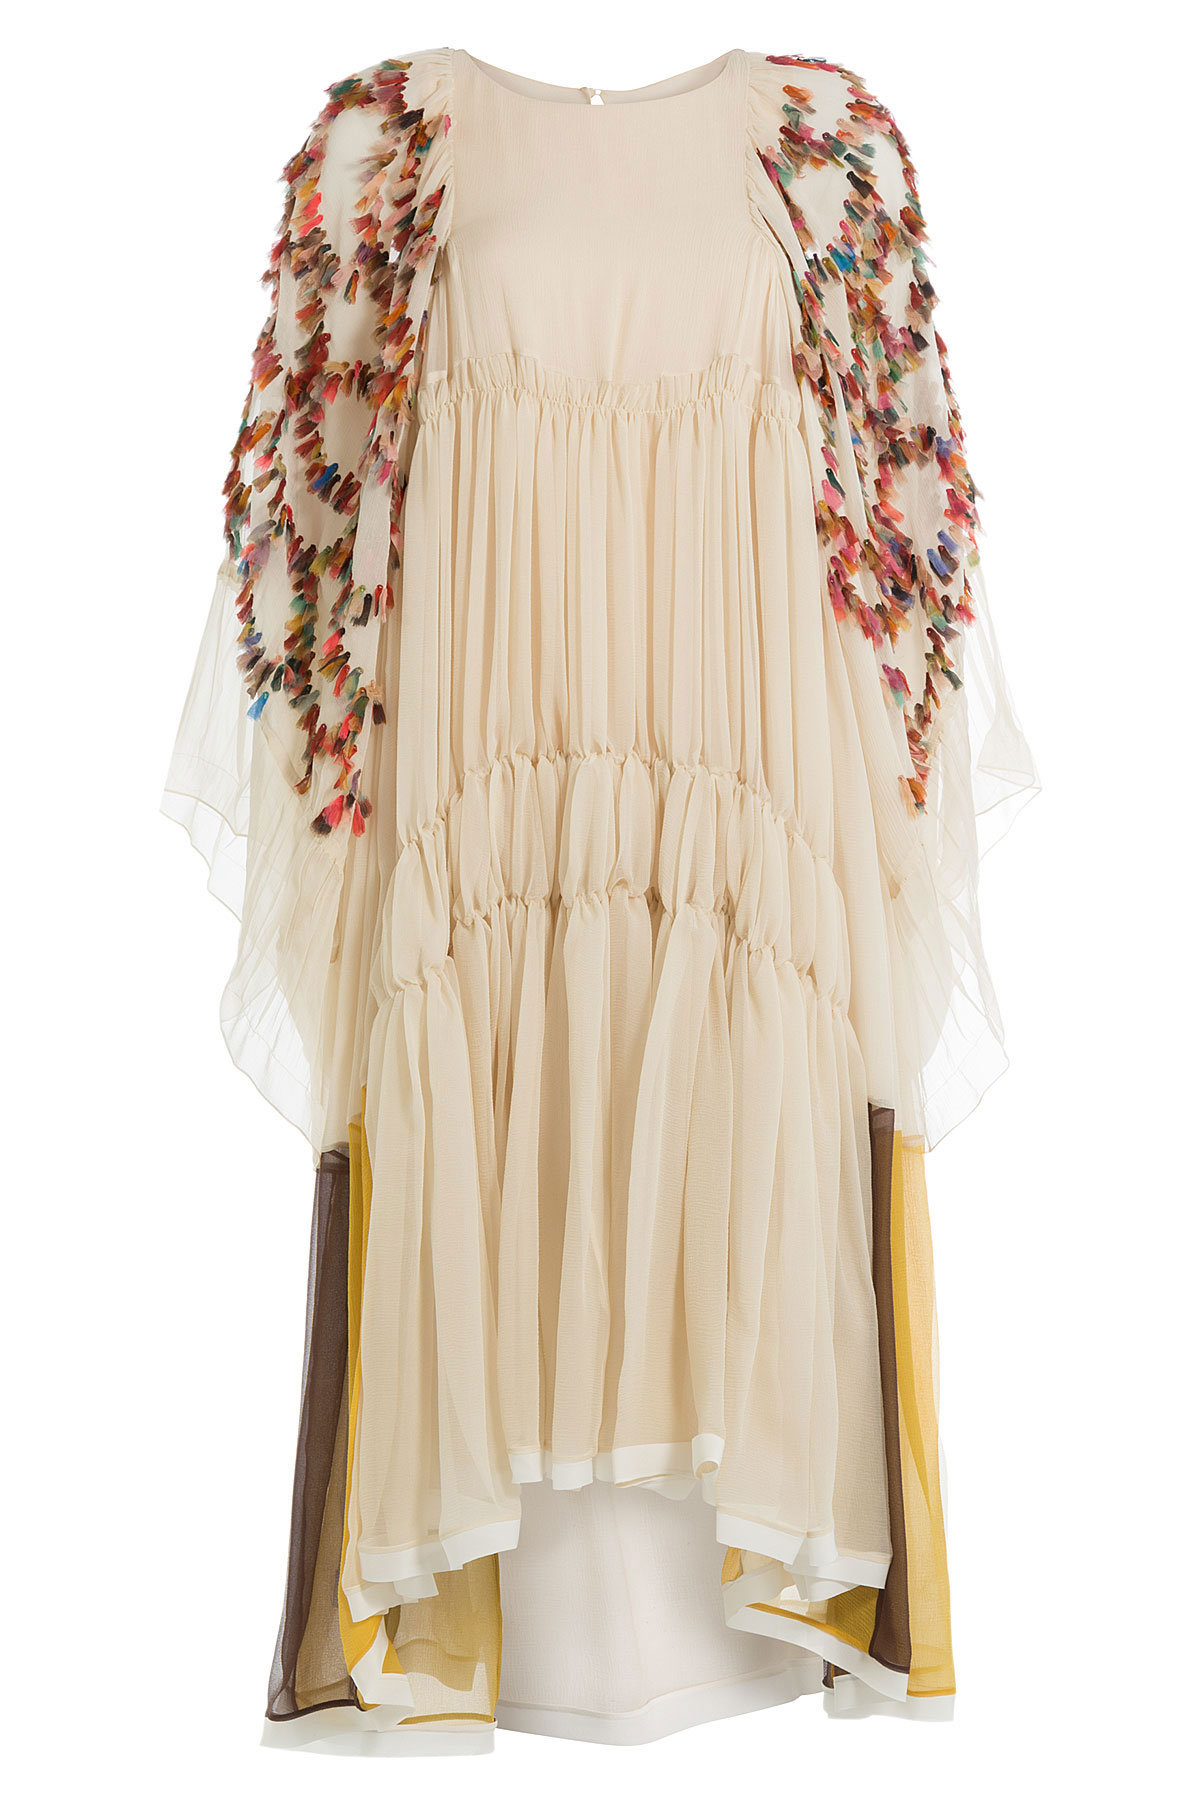 Chiffon Dress with Multicolored Details by Chloe